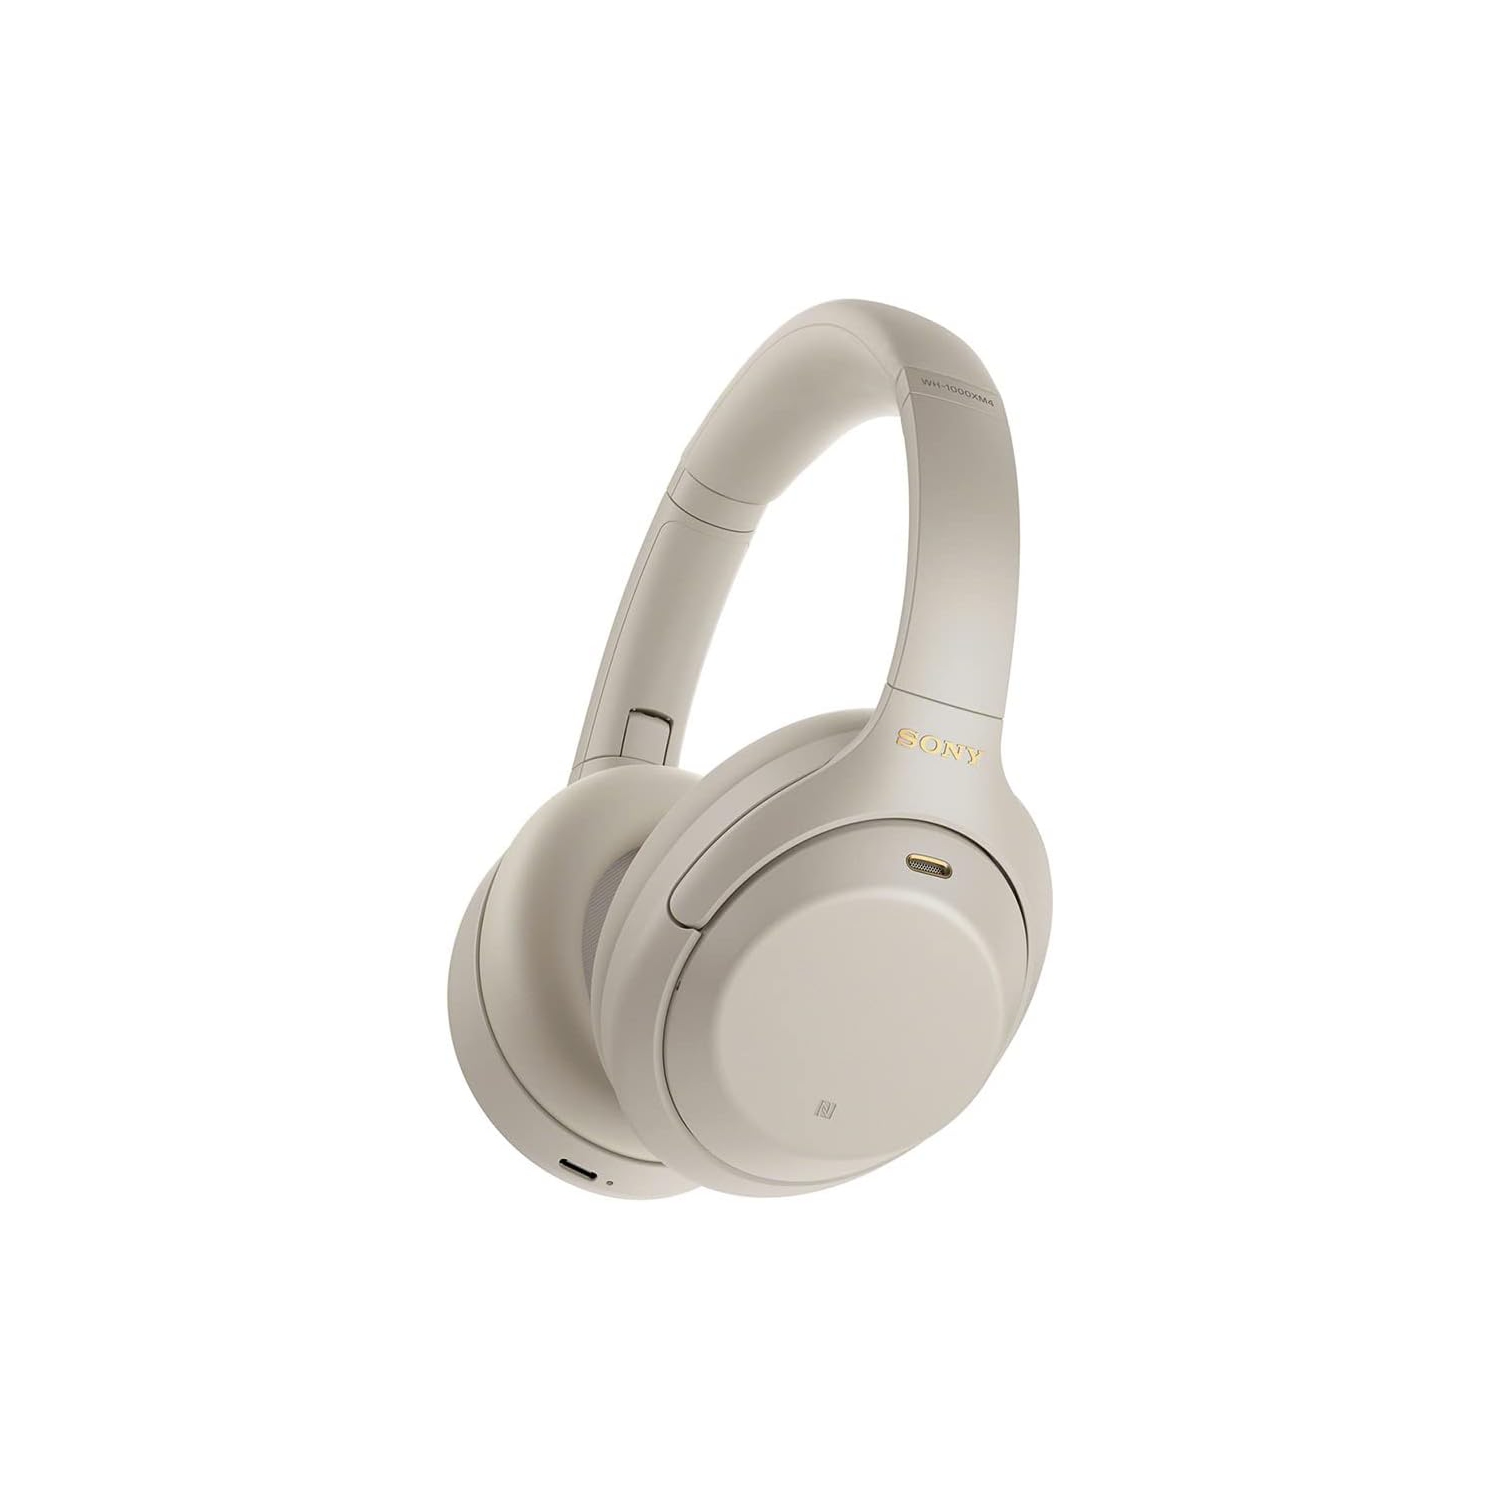 Refurbished (Excellent) - Sony WH-1000XM4 Over-Ear Noise Cancelling Bluetooth Headphones - Silver